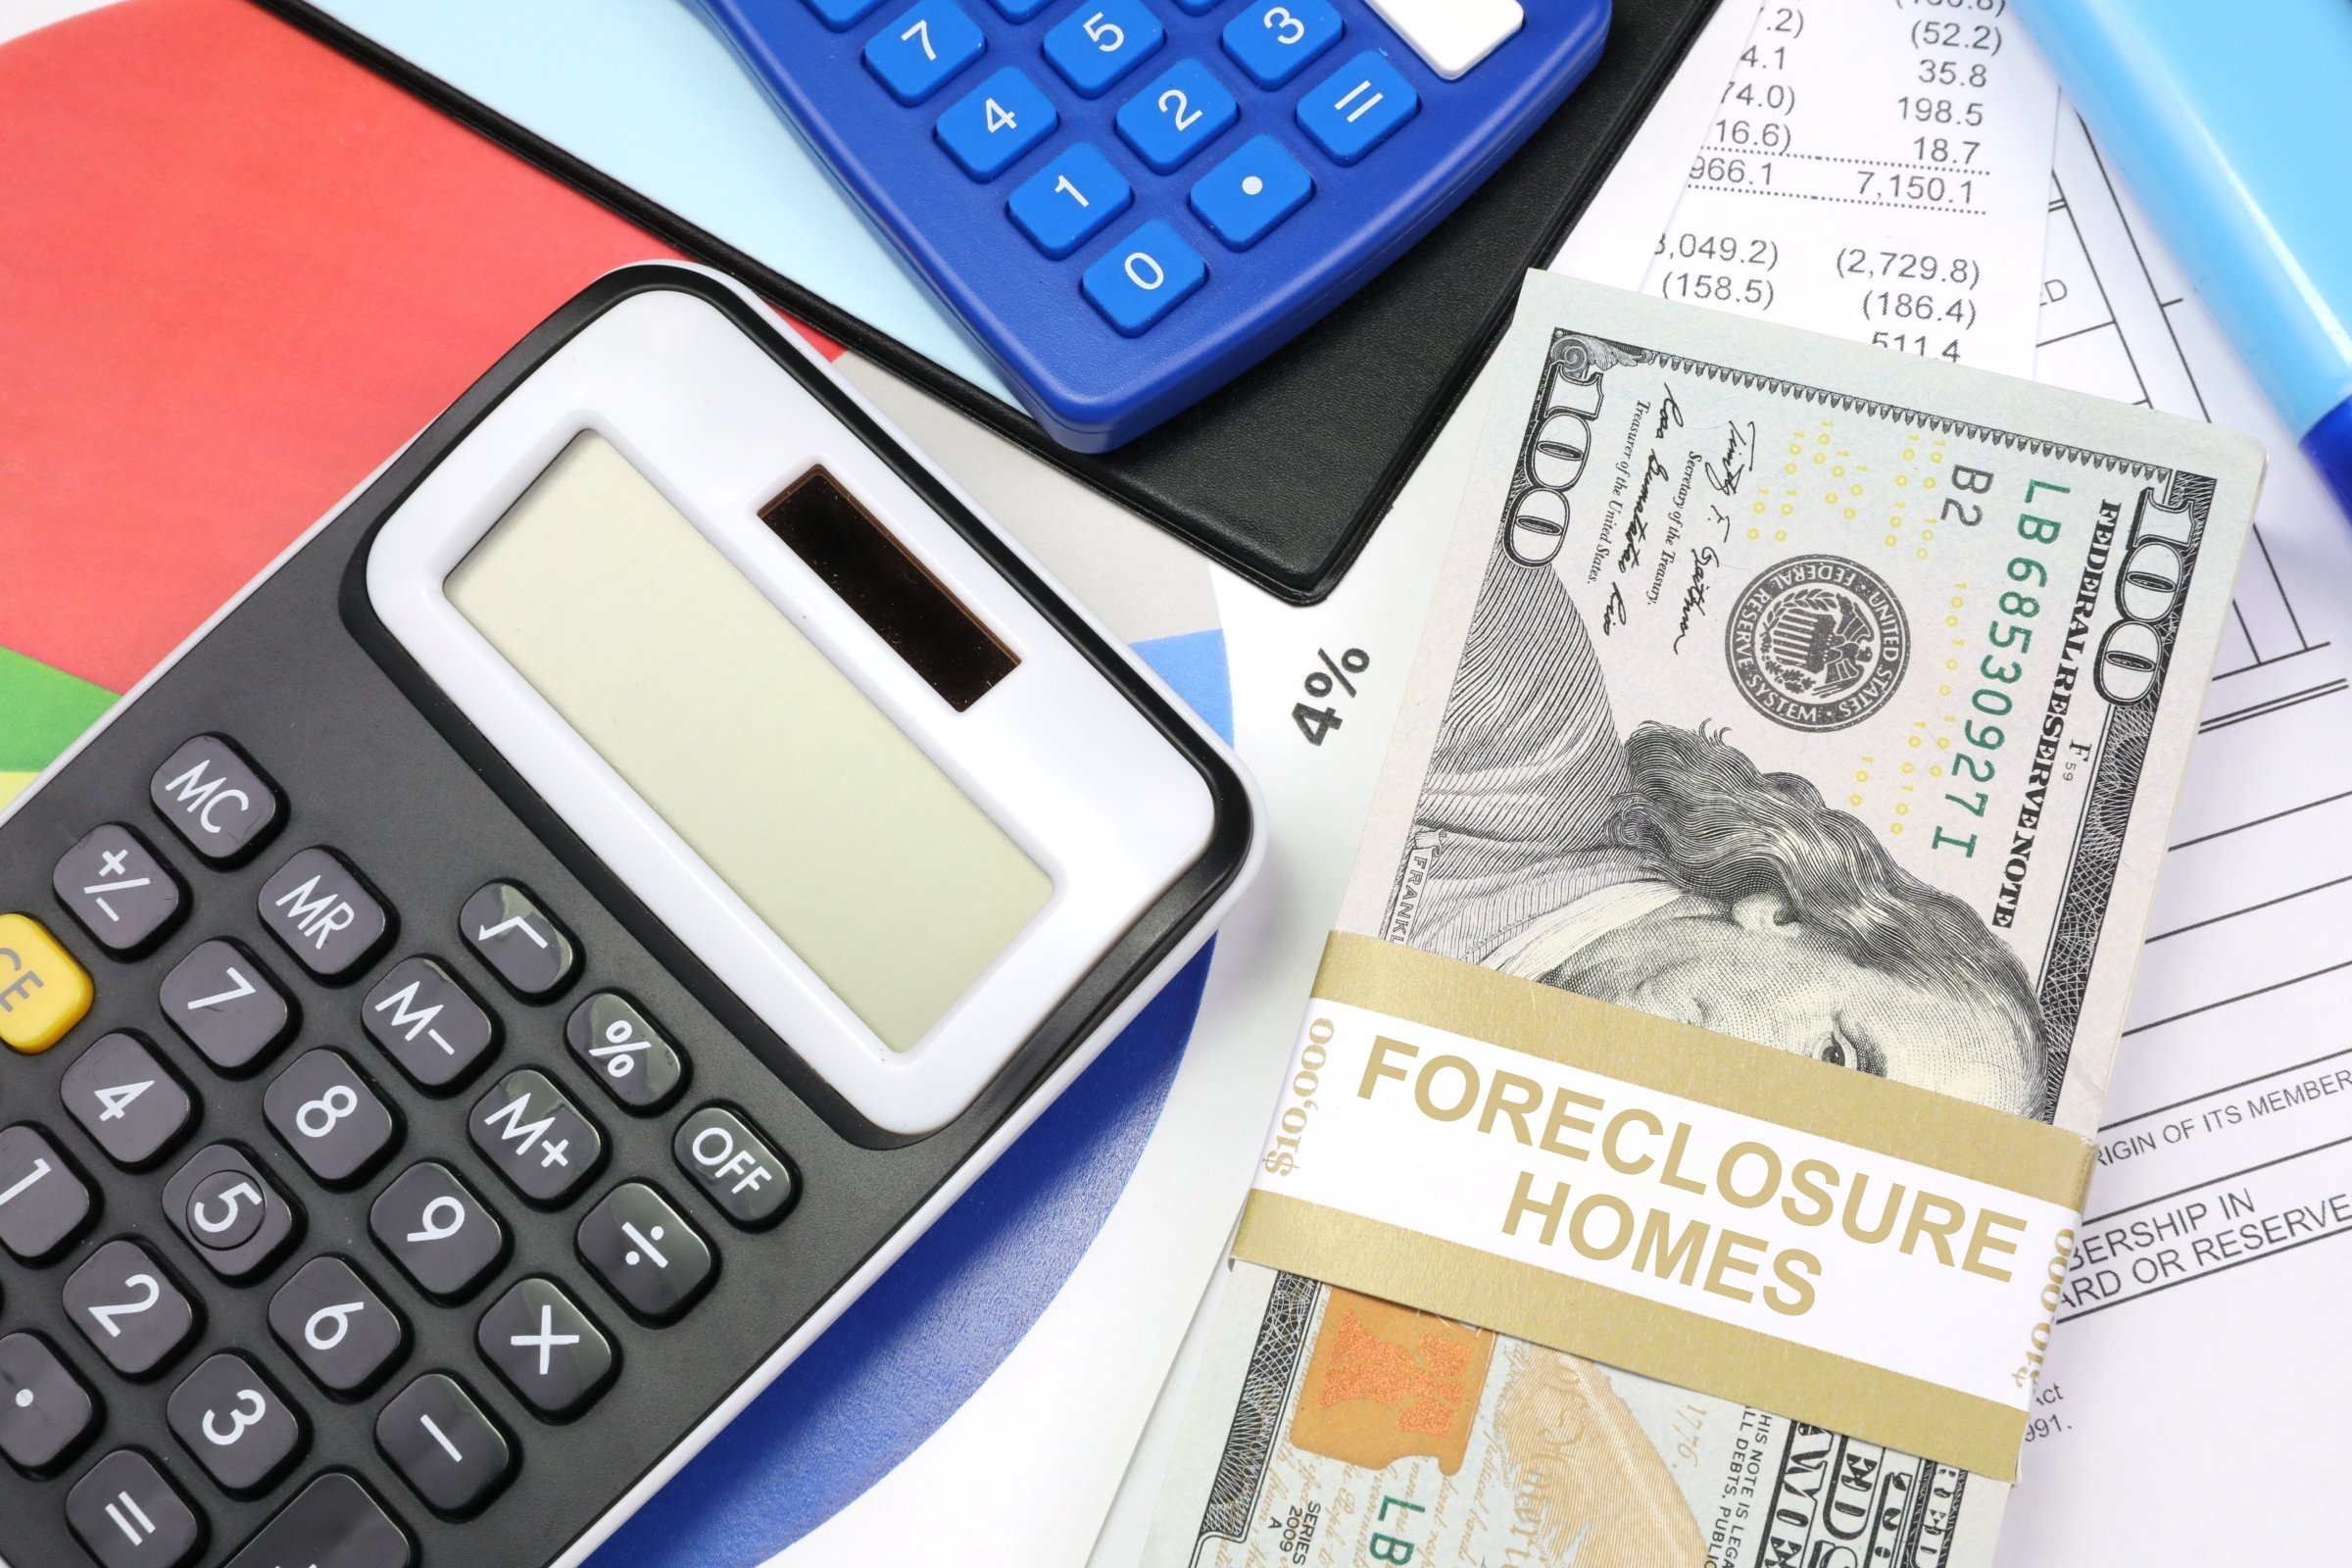 foreclosure homes